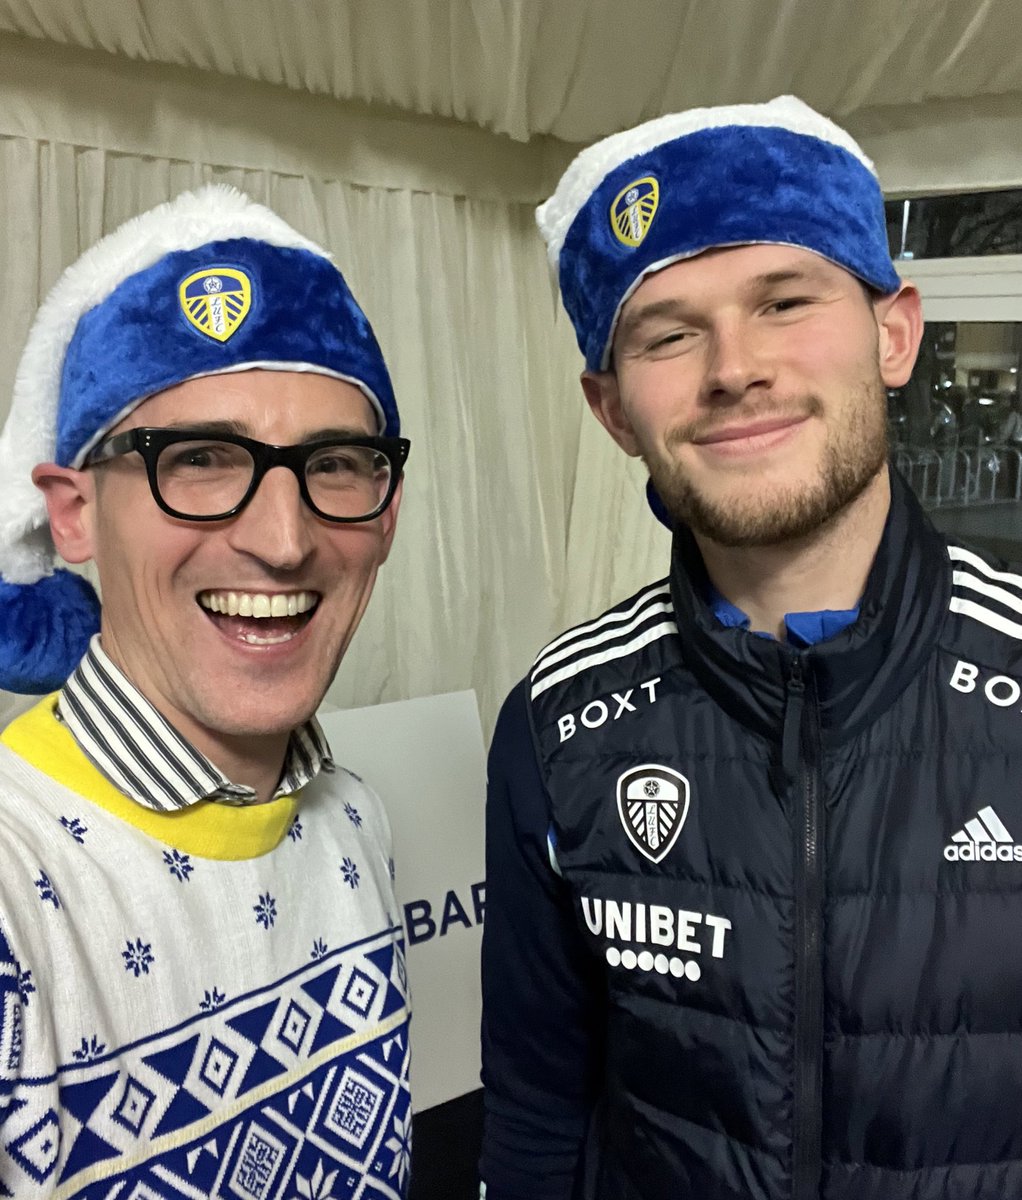 That’s Ipswich stuffed. Now just have to get on with the turkey and I’m sorted. Have a very Meslier Christmas everyone! #LUFC #MOT #ALAW